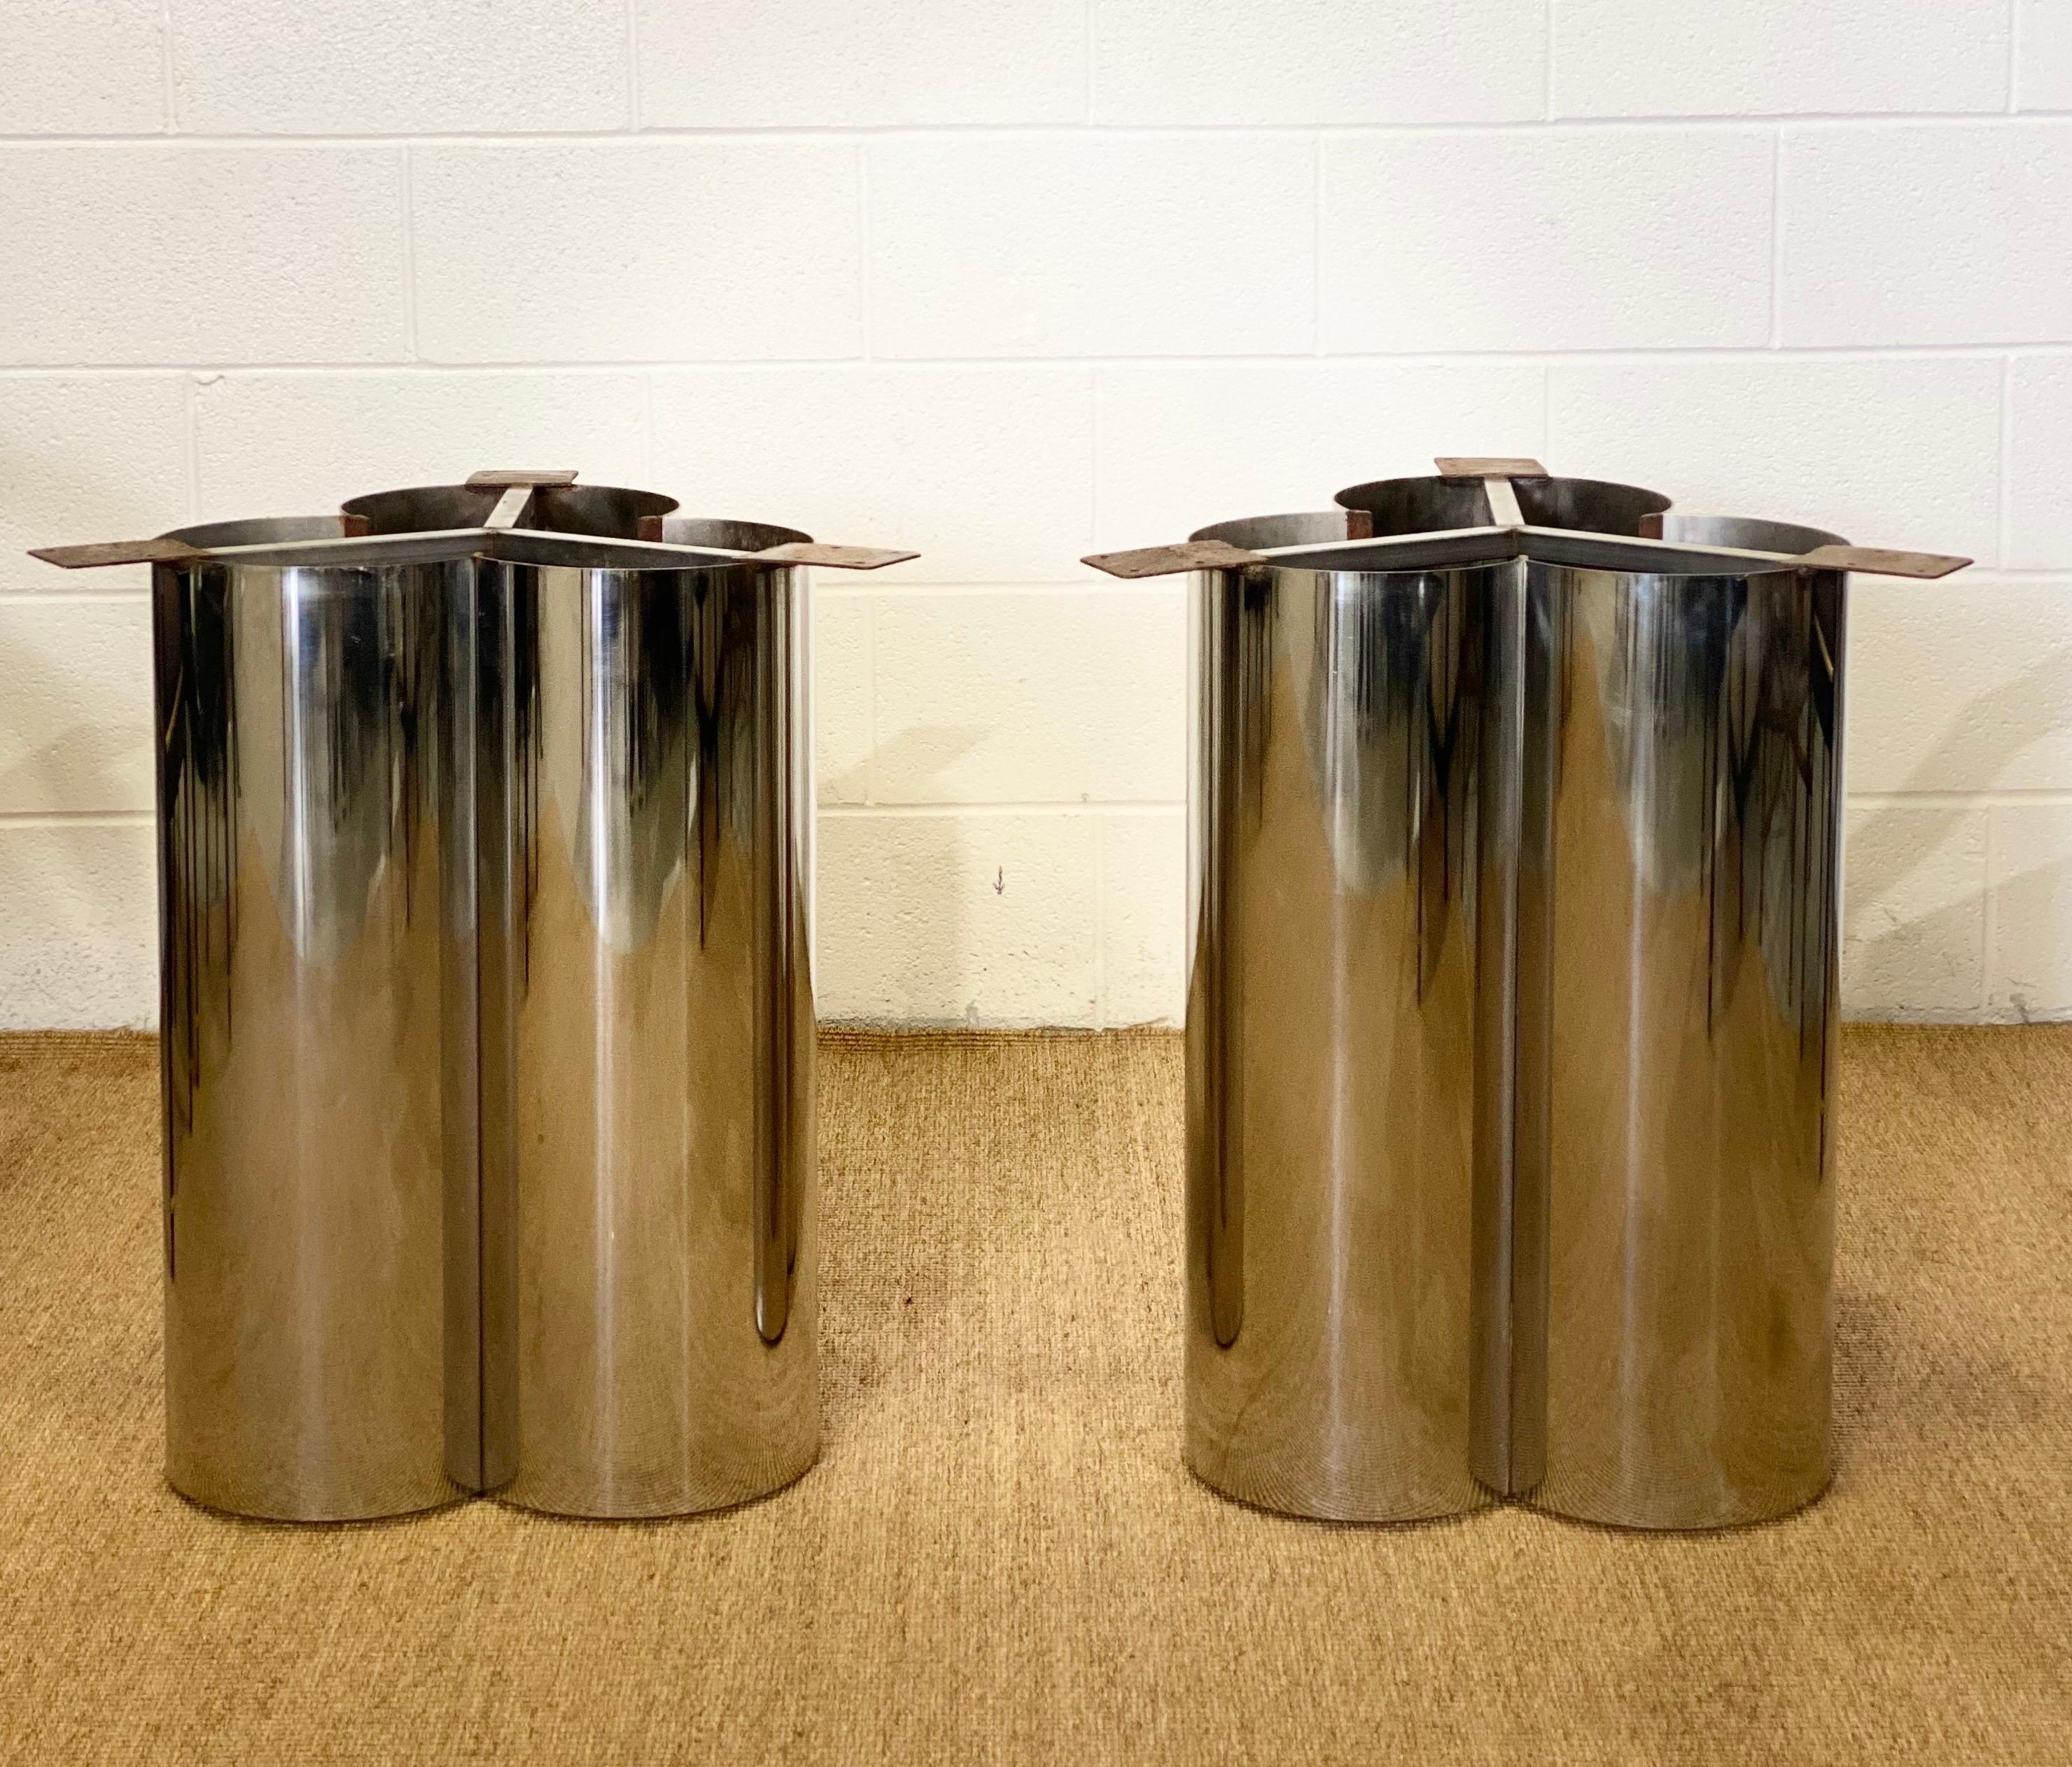 1970s Mastercraft Stainless Steel Table Pedestals – a Pair For Sale 2